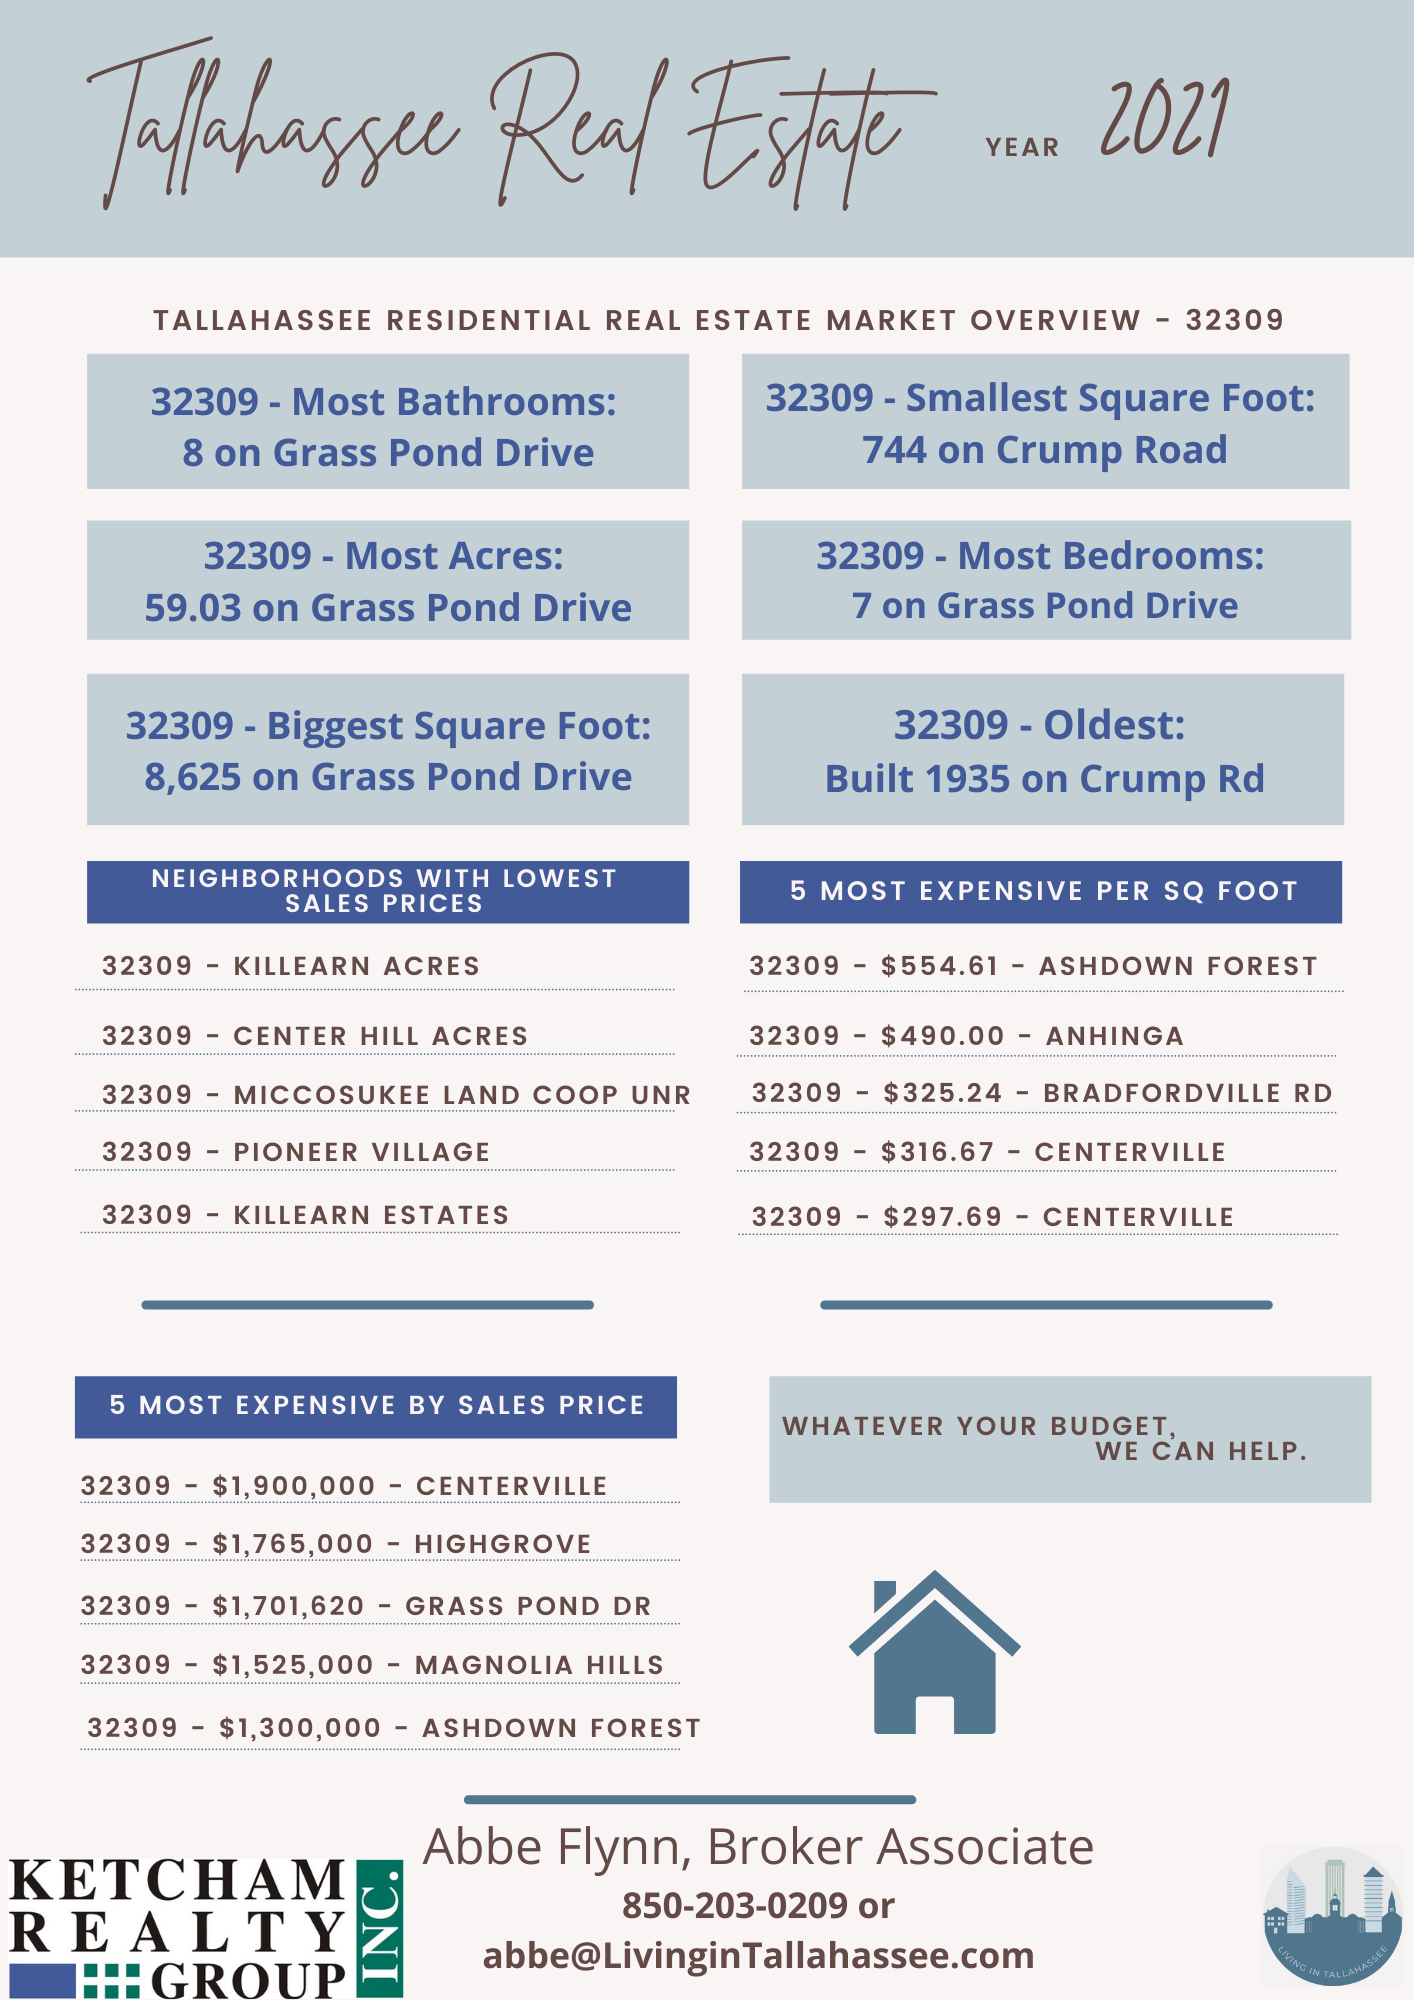 Overview of 2021 real estate sales in 32309 Most baths 8 on Grass Pond Drive, Smallest 744sf on Crump Road, most acres 59.03 on Grass Pond Drive. Most bedrooms was found on Grass Pond Drive at 7 bedrooms. Biggest square foot was 8,625 on Grass Pond Drive. Oldest was built in 1935 sold on Crump Road.